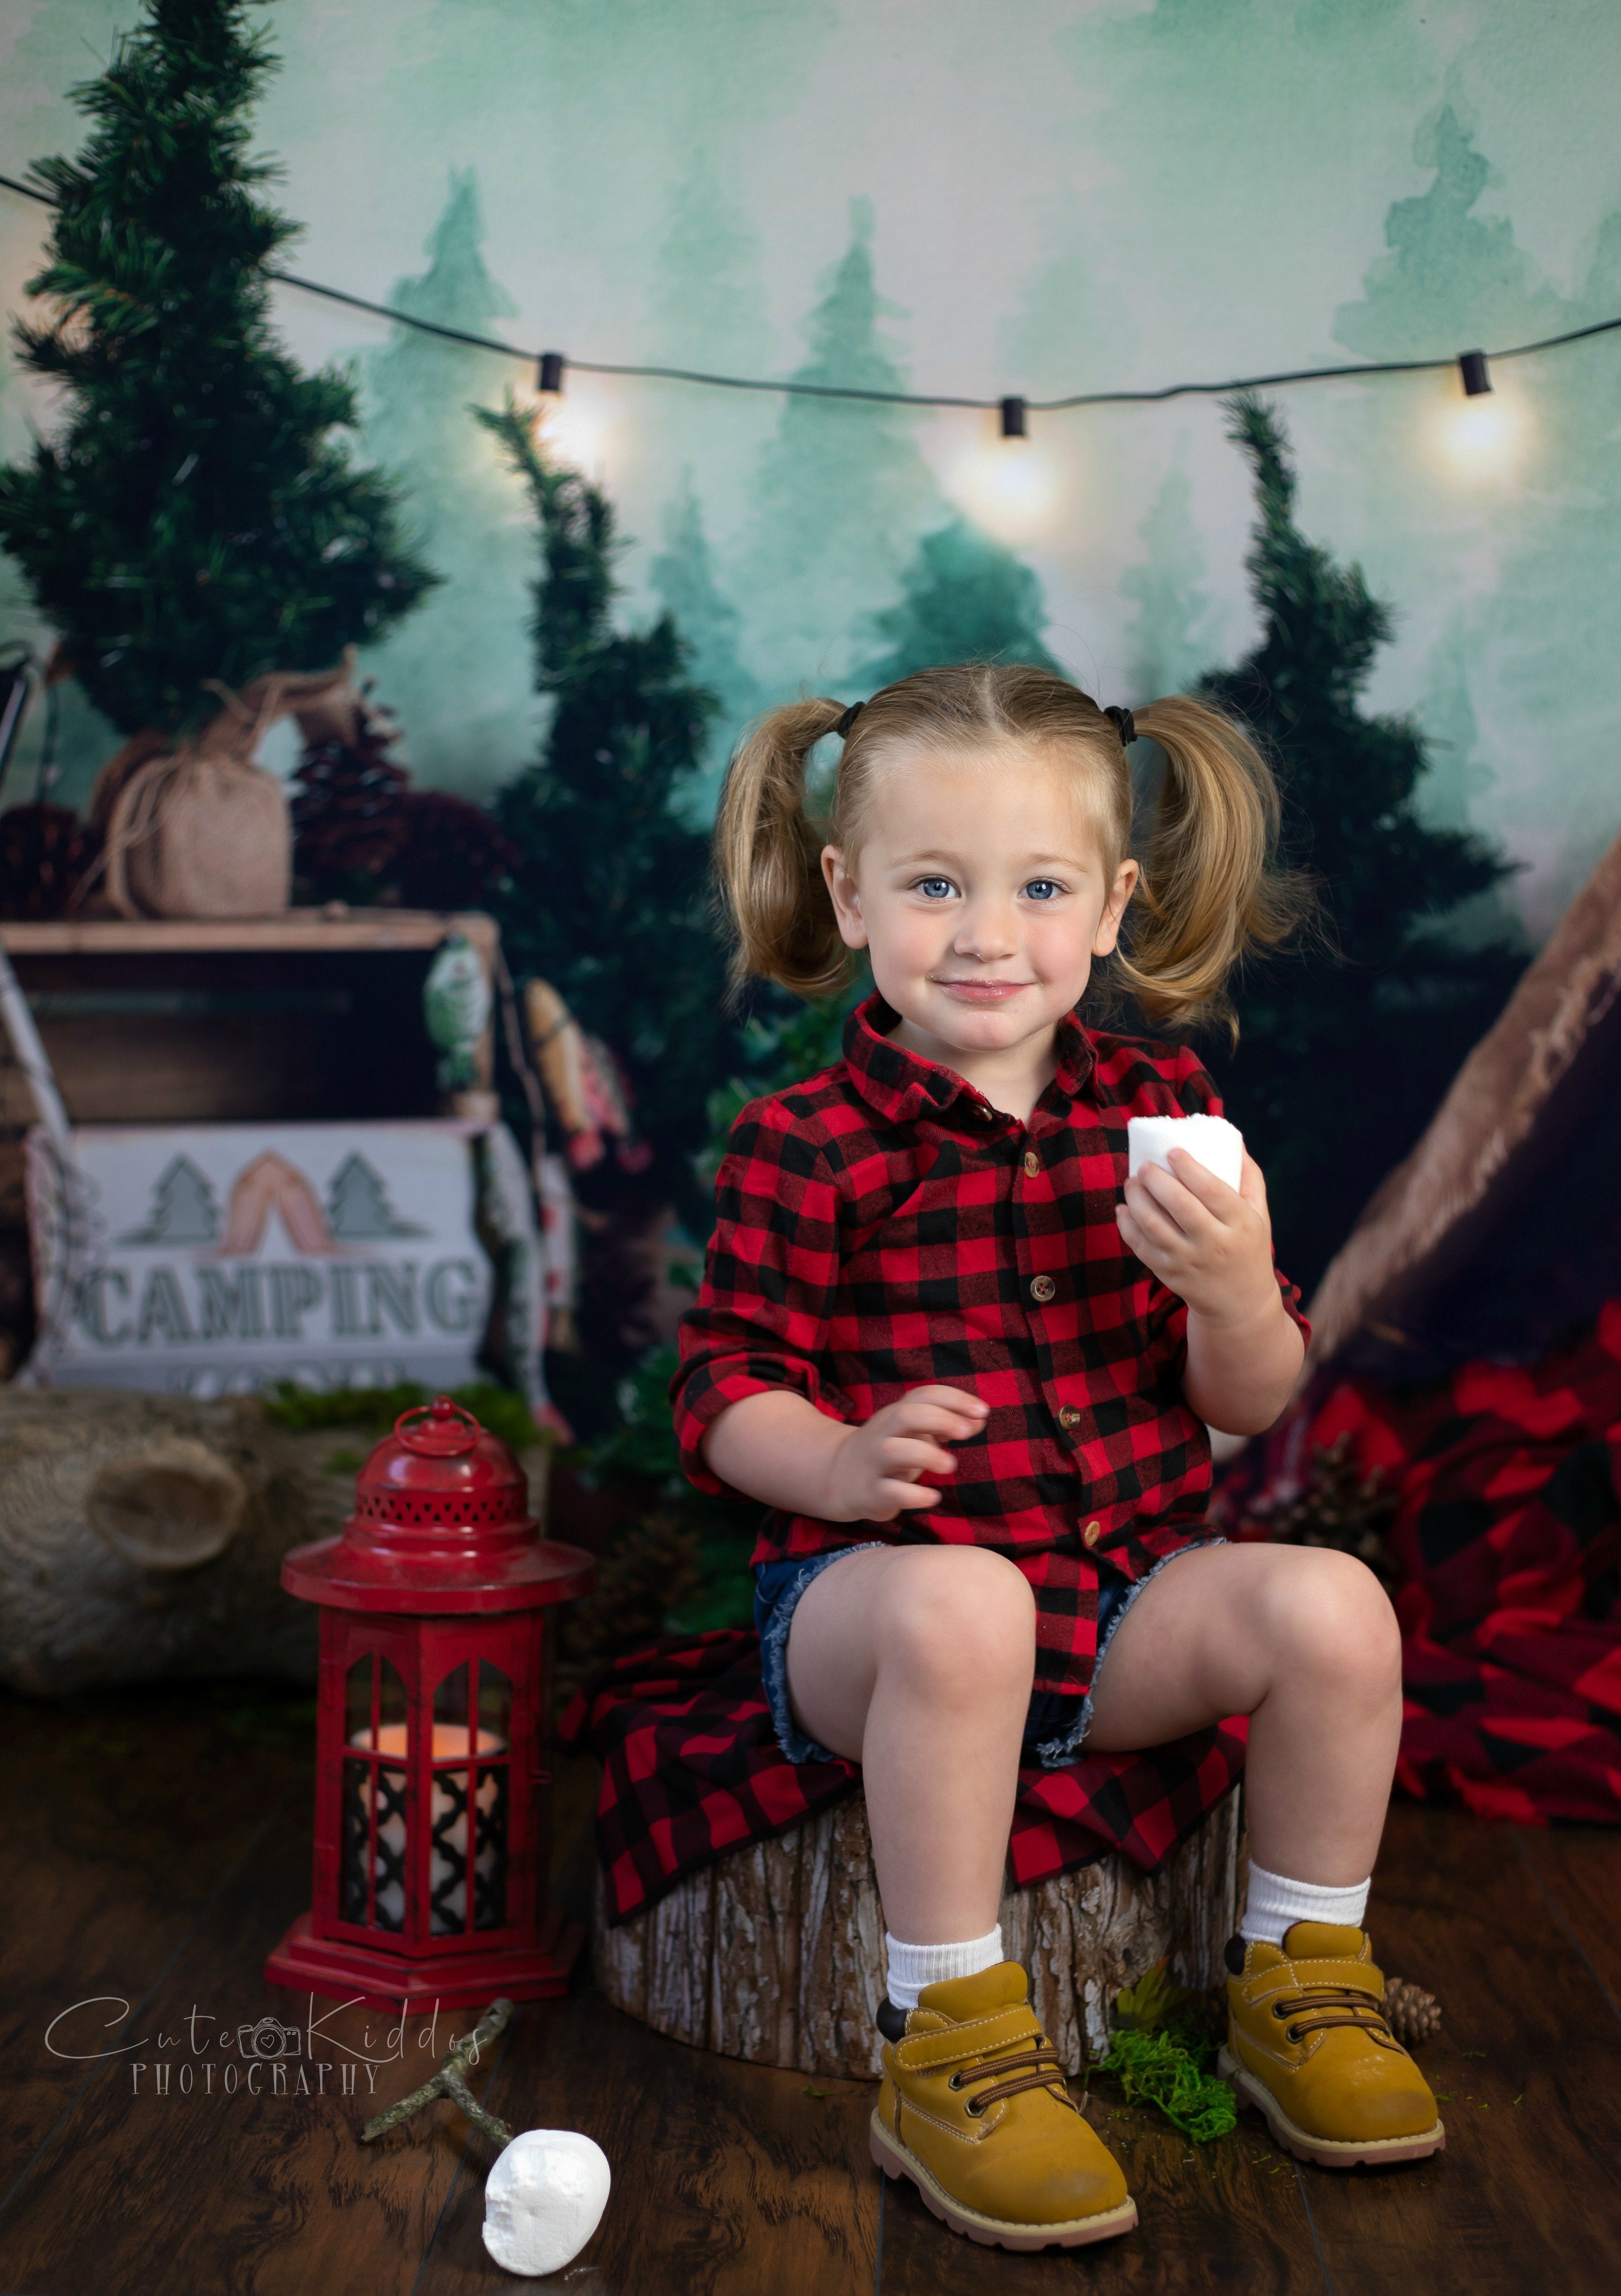 Kate Forest Camping Children Backdrop Designed by Megan Leigh Photography